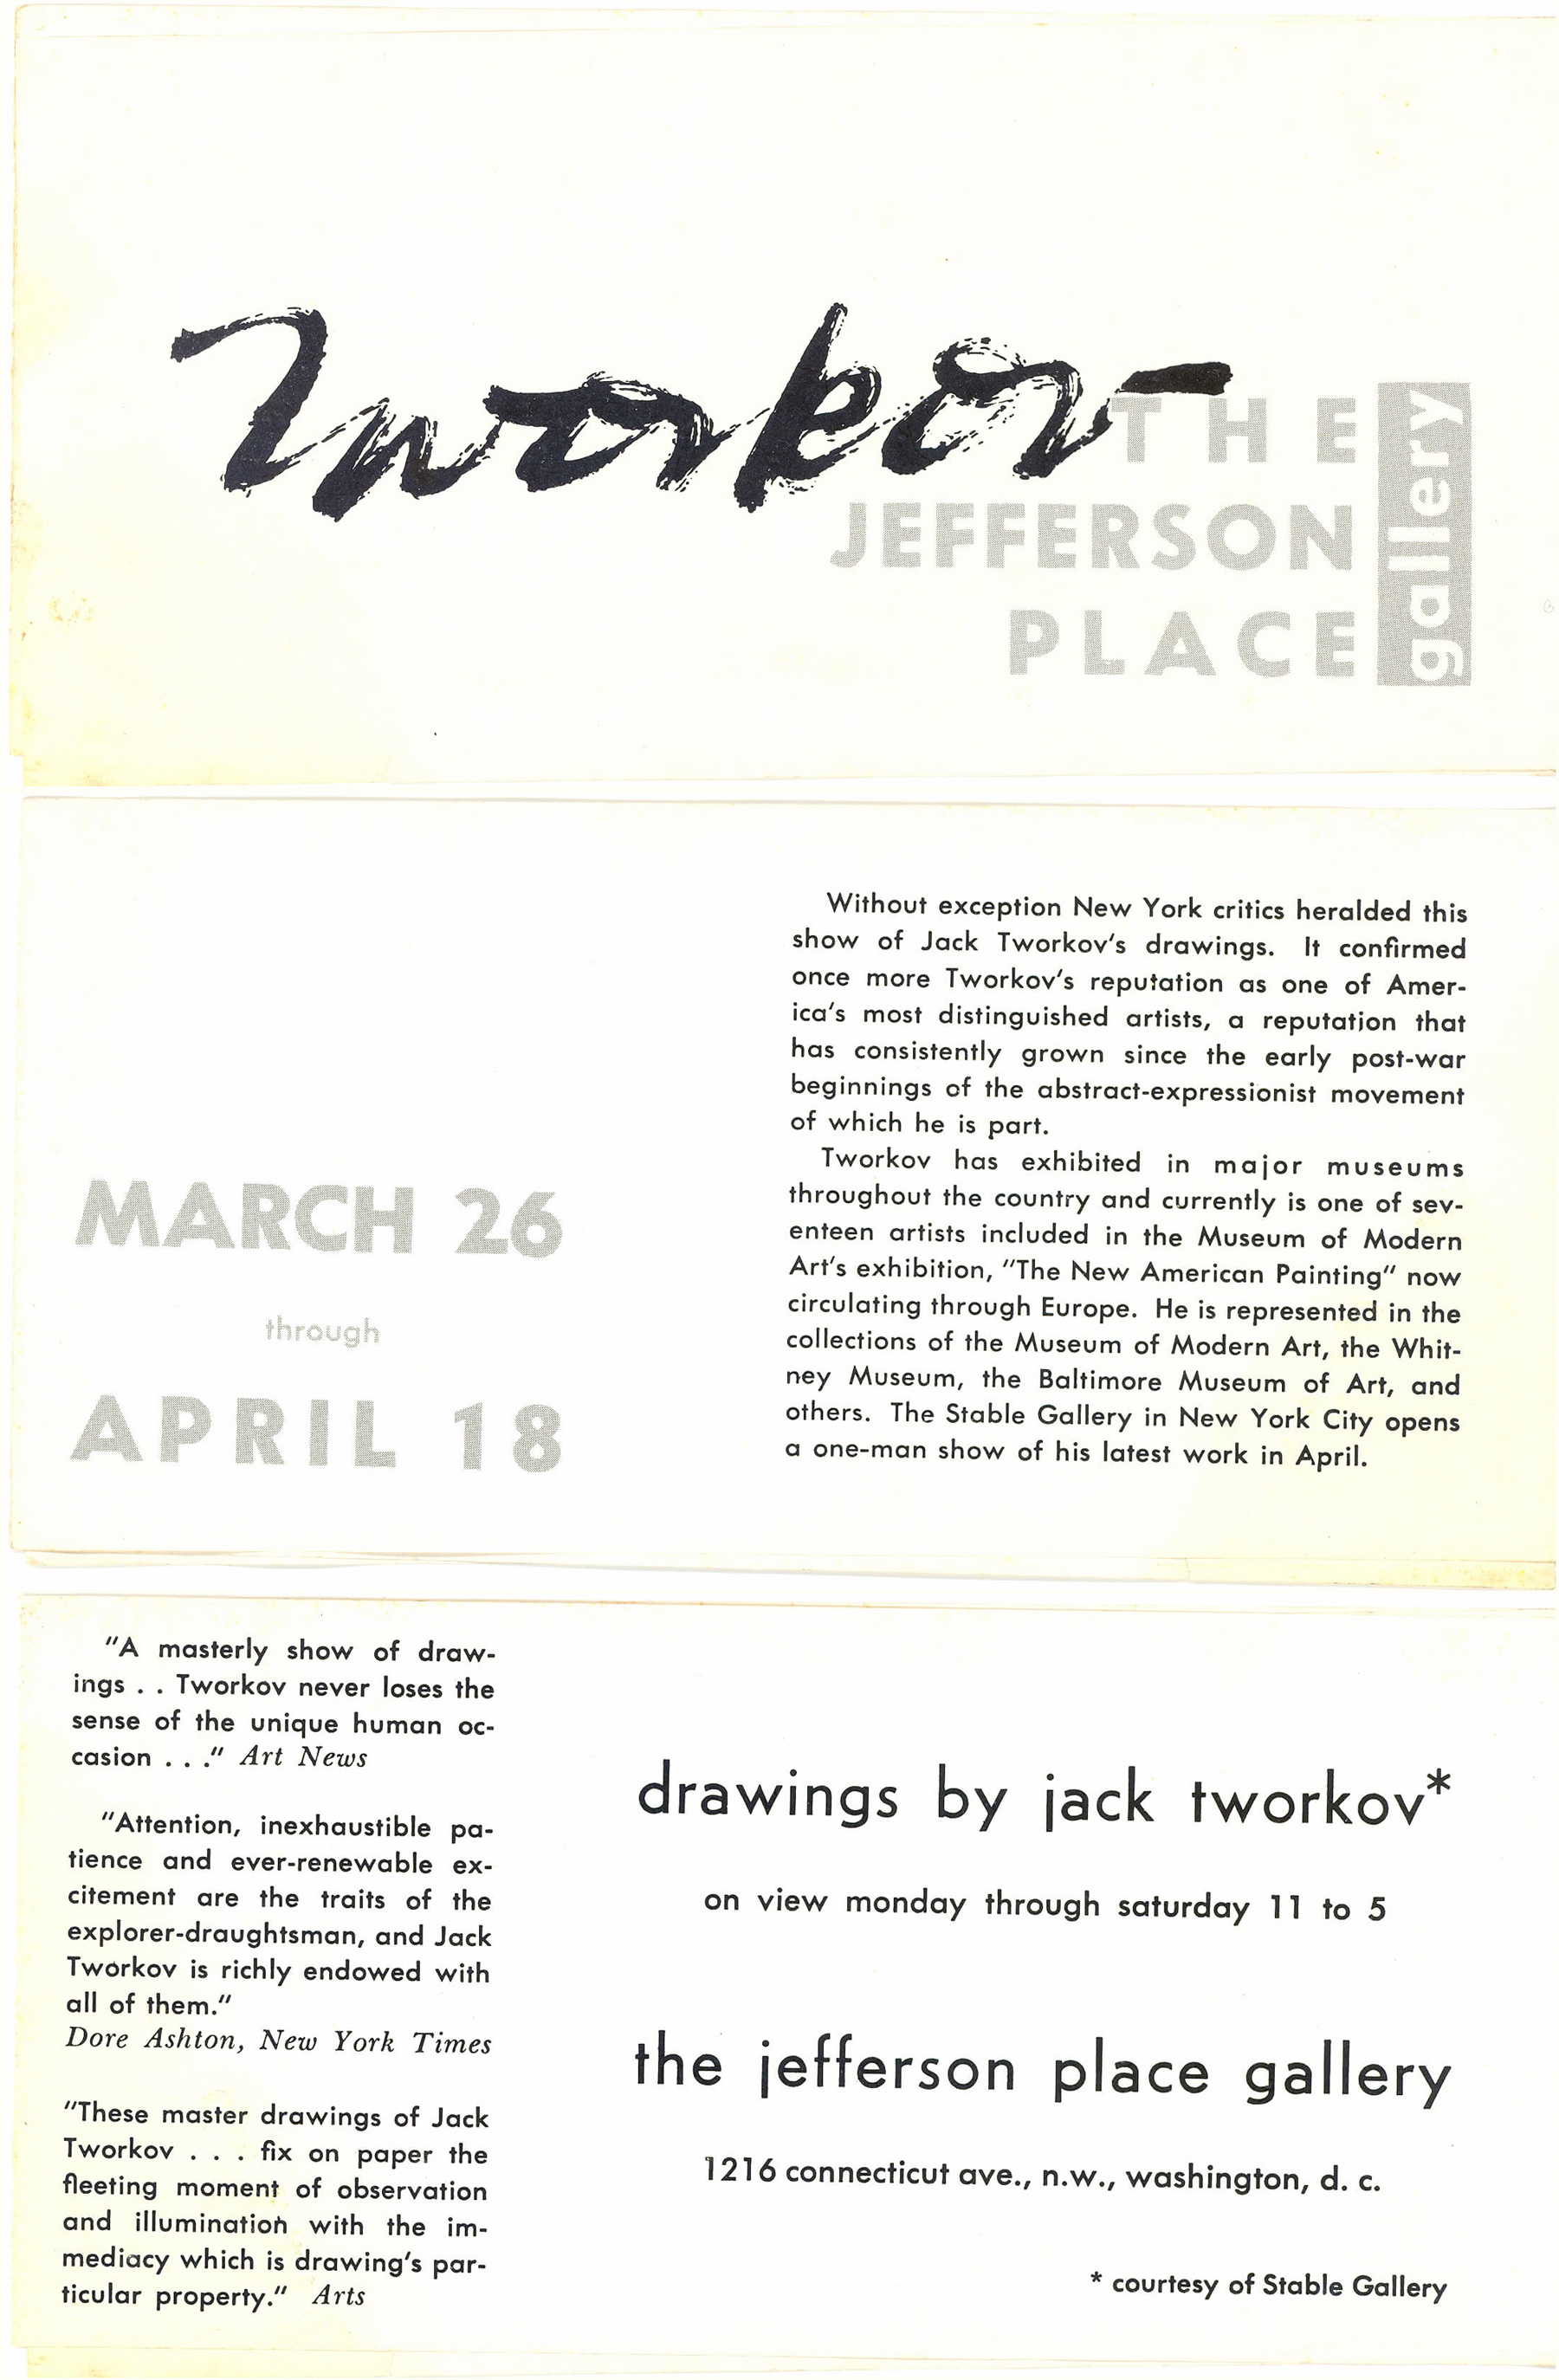 Announcement card for Jack Tworkov at Jefferson Place Gallery, 1959